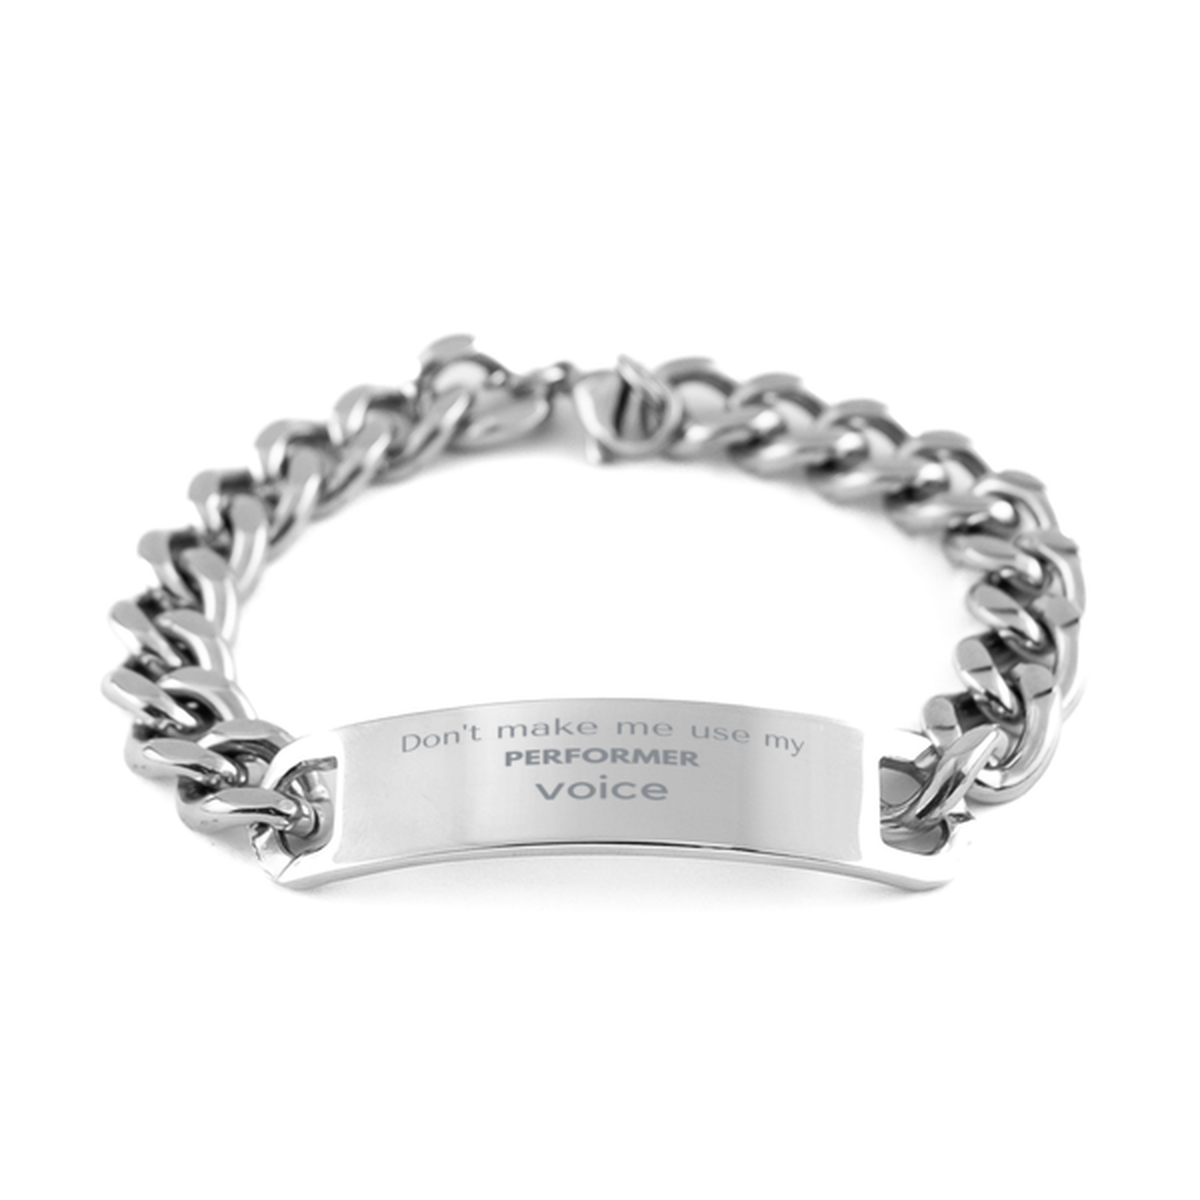 Don't make me use my Performer voice, Sarcasm Performer Gifts, Christmas Performer Cuban Chain Stainless Steel Bracelet Birthday Unique Gifts For Performer Coworkers, Men, Women, Colleague, Friends